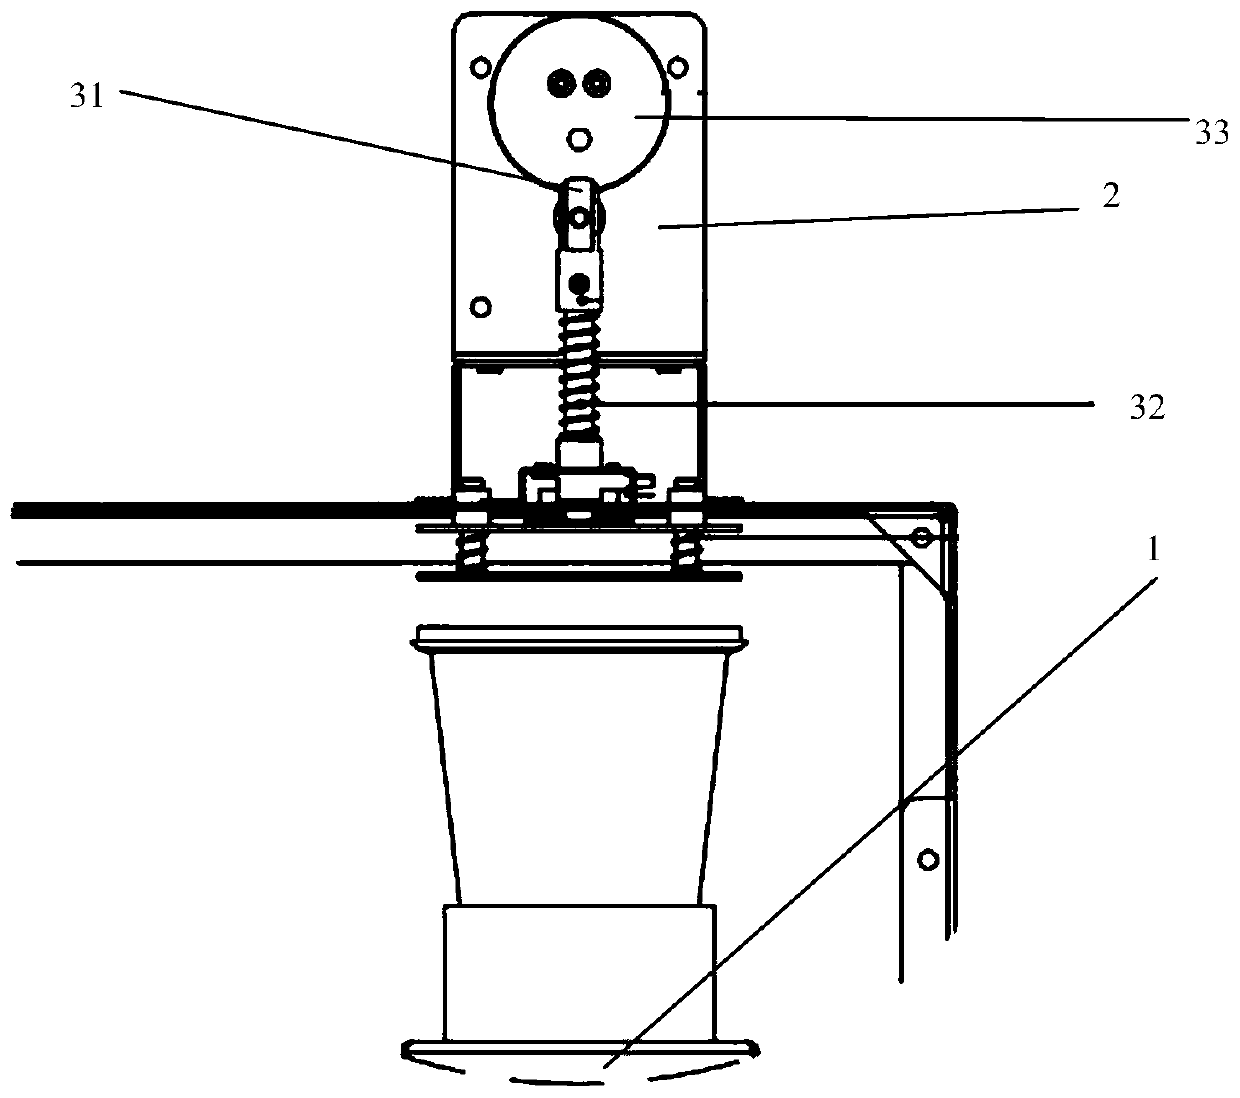 Automatic cup cover pressing device